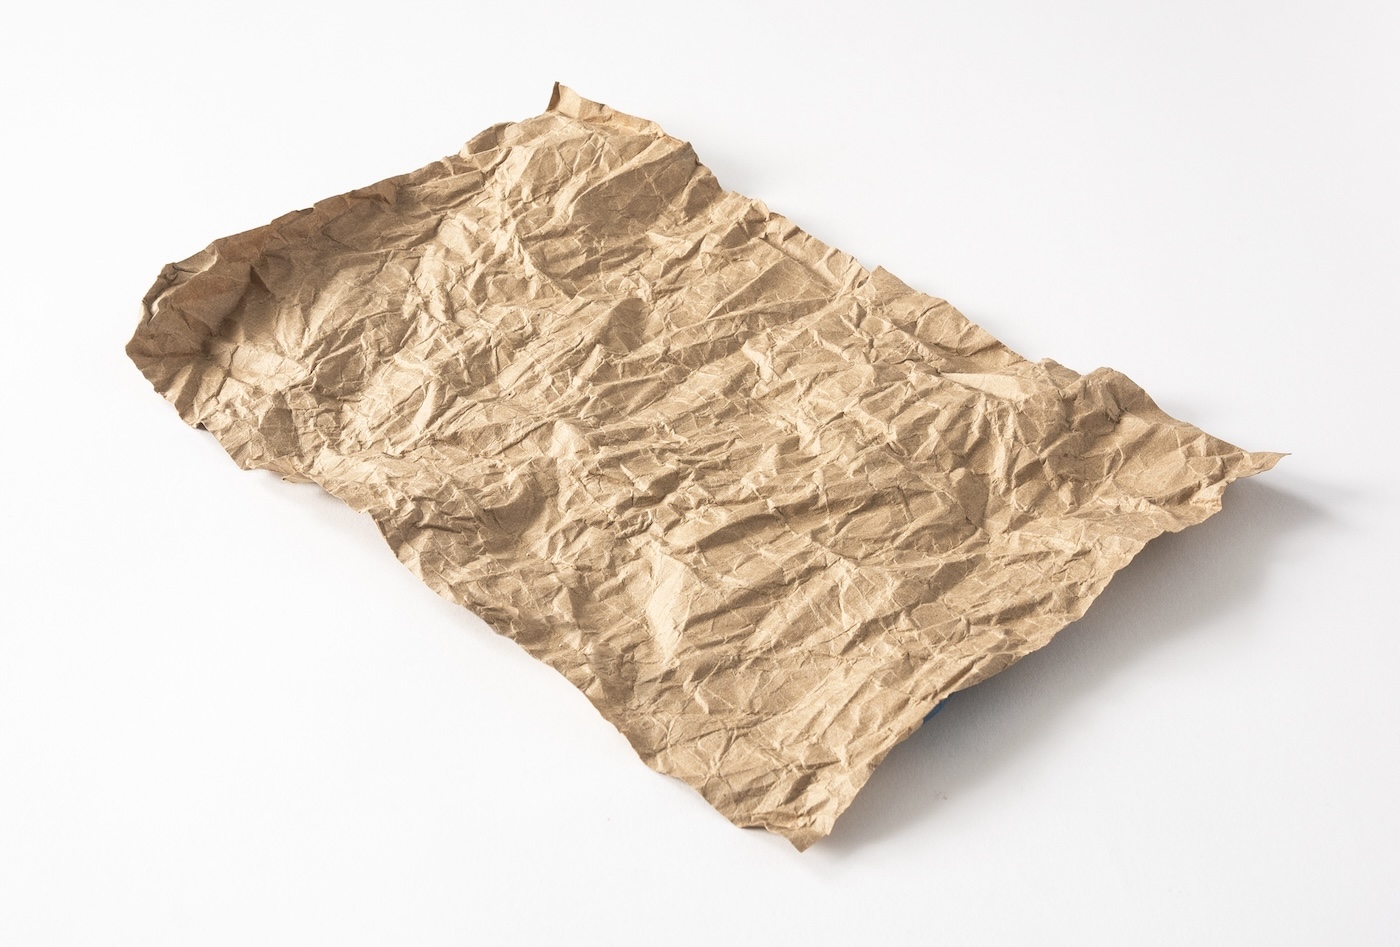 Piece of wrinkled paper bag on a surface